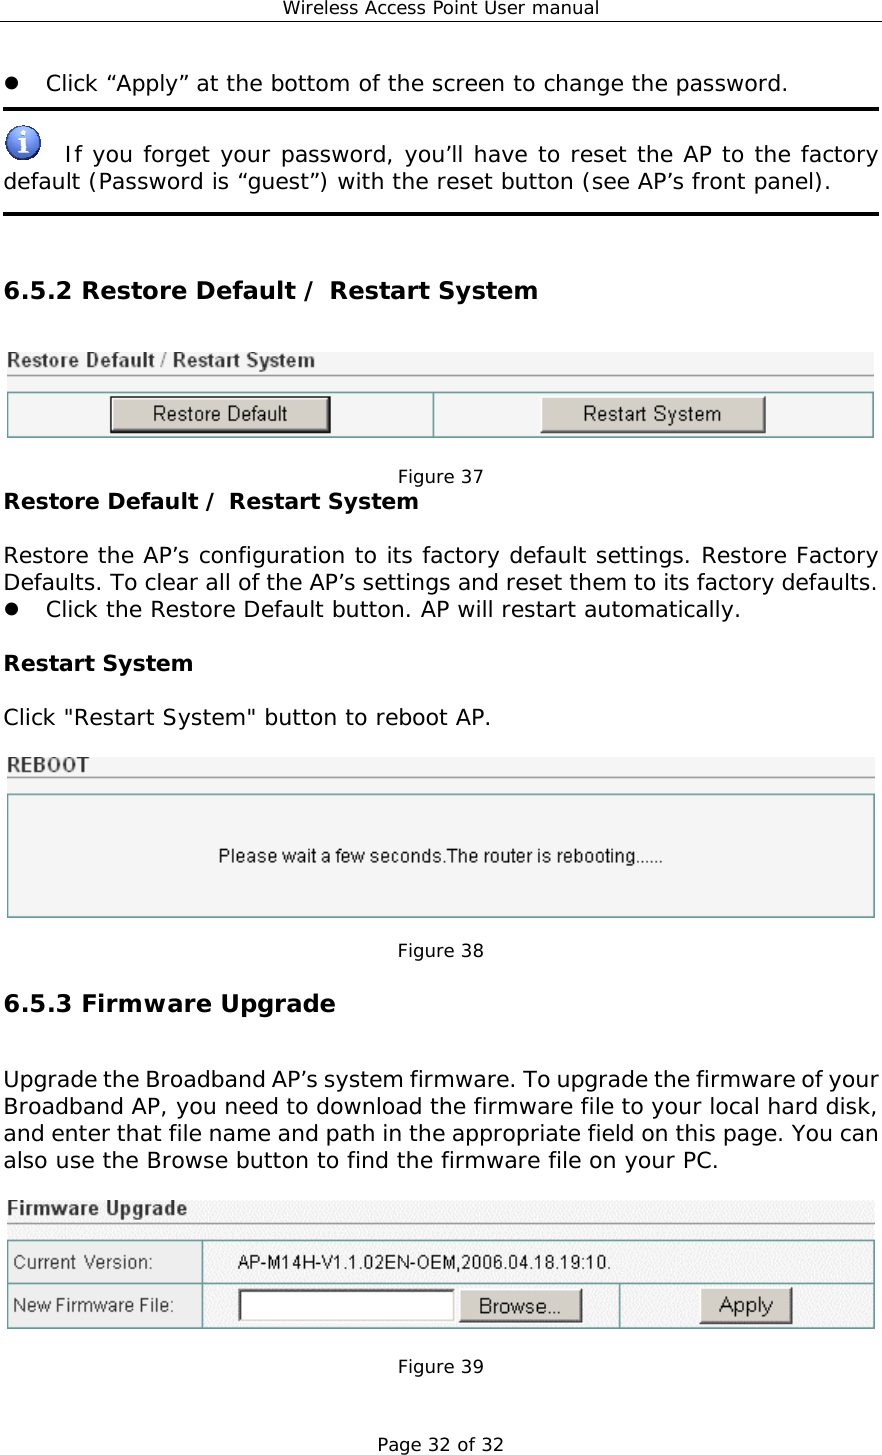 Wireless Access Point User manual Page 32 of 32   Click “Apply” at the bottom of the screen to change the password.    If you forget your password, you’ll have to reset the AP to the factory default (Password is “guest”) with the reset button (see AP’s front panel).    6.5.2 Restore Default / Restart System   Figure 37 Restore Default / Restart System  Restore the AP’s configuration to its factory default settings. Restore Factory Defaults. To clear all of the AP’s settings and reset them to its factory defaults.    Click the Restore Default button. AP will restart automatically.   Restart System  Click &quot;Restart System&quot; button to reboot AP.    Figure 38 6.5.3 Firmware Upgrade Upgrade the Broadband AP’s system firmware. To upgrade the firmware of your Broadband AP, you need to download the firmware file to your local hard disk, and enter that file name and path in the appropriate field on this page. You can also use the Browse button to find the firmware file on your PC.    Figure 39 